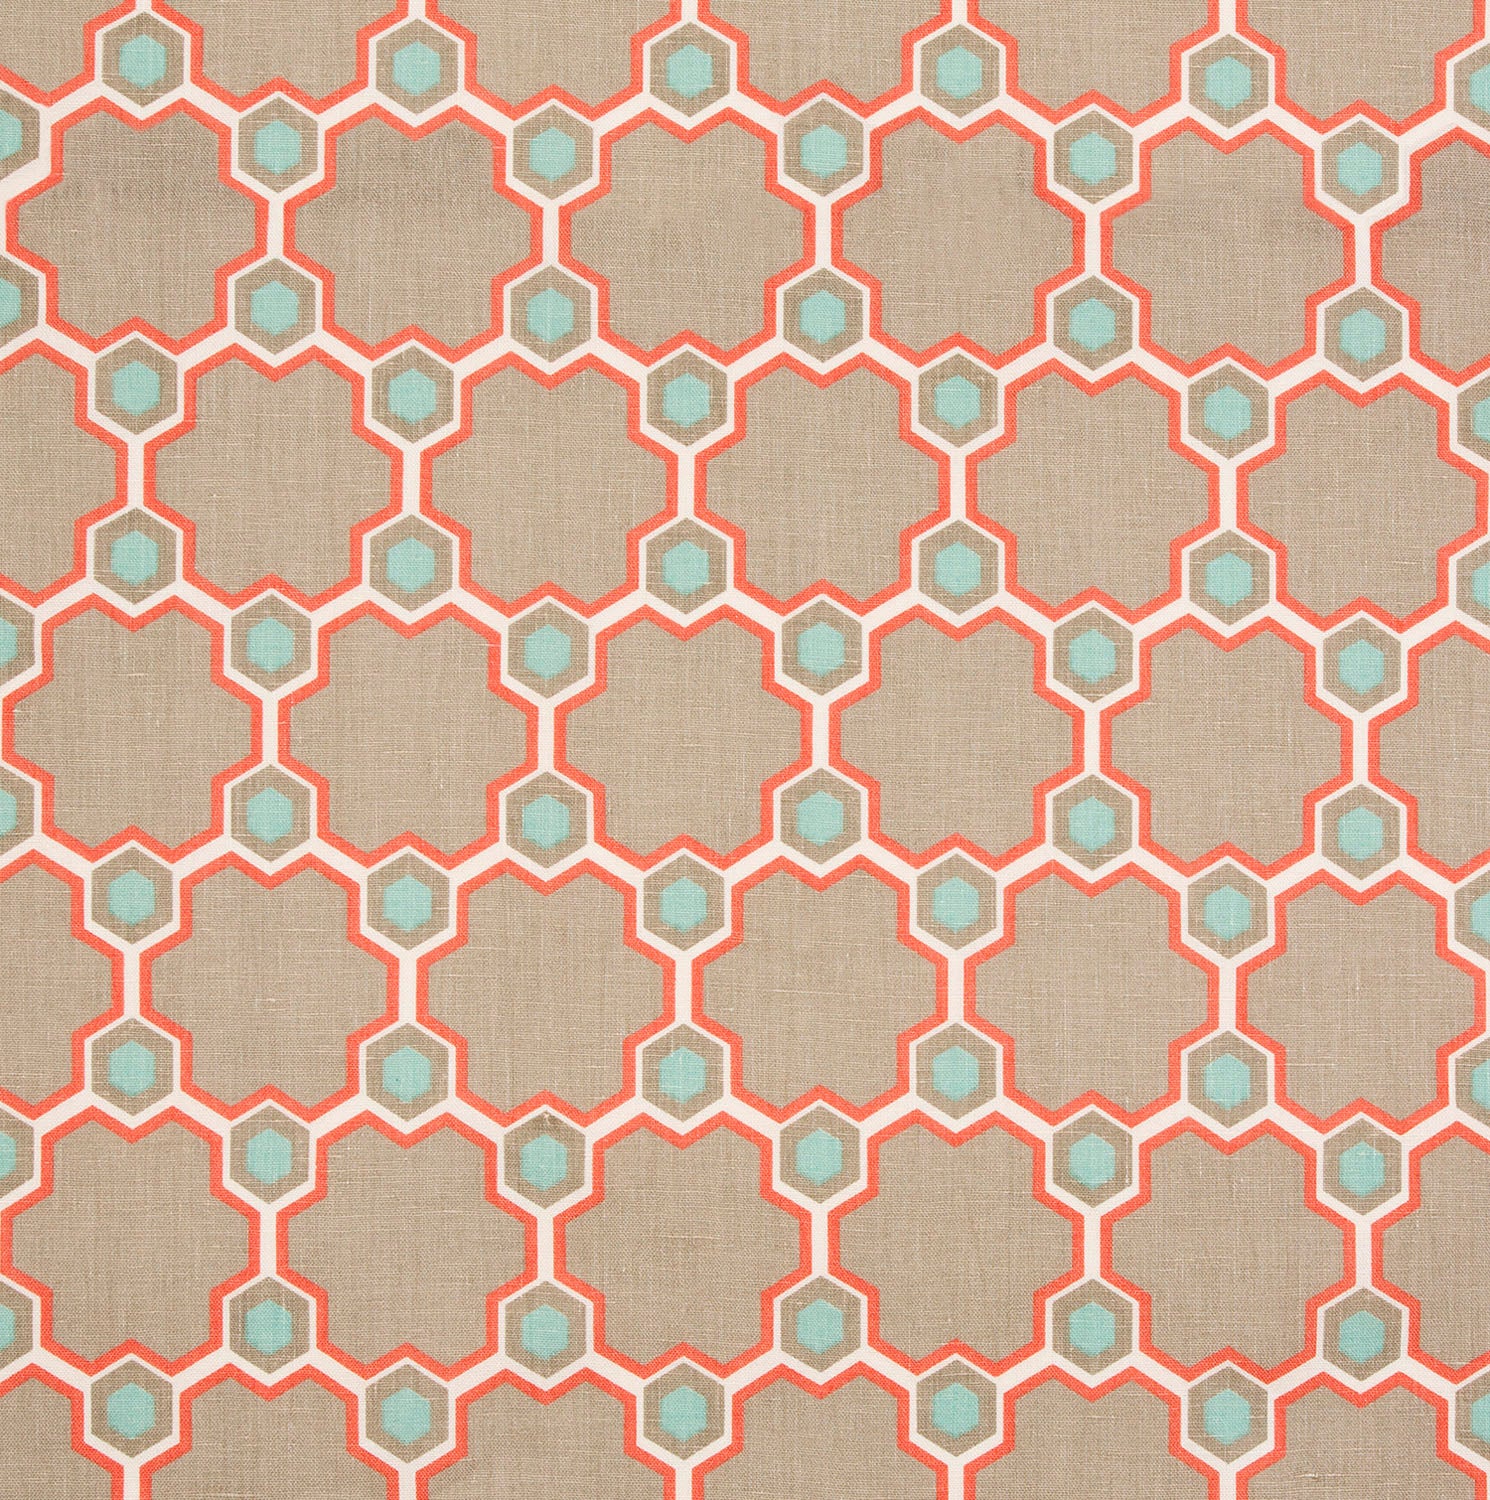 Detail of fabric in a geometric honeycomb pattern in shades of tan, white, blue and coral.